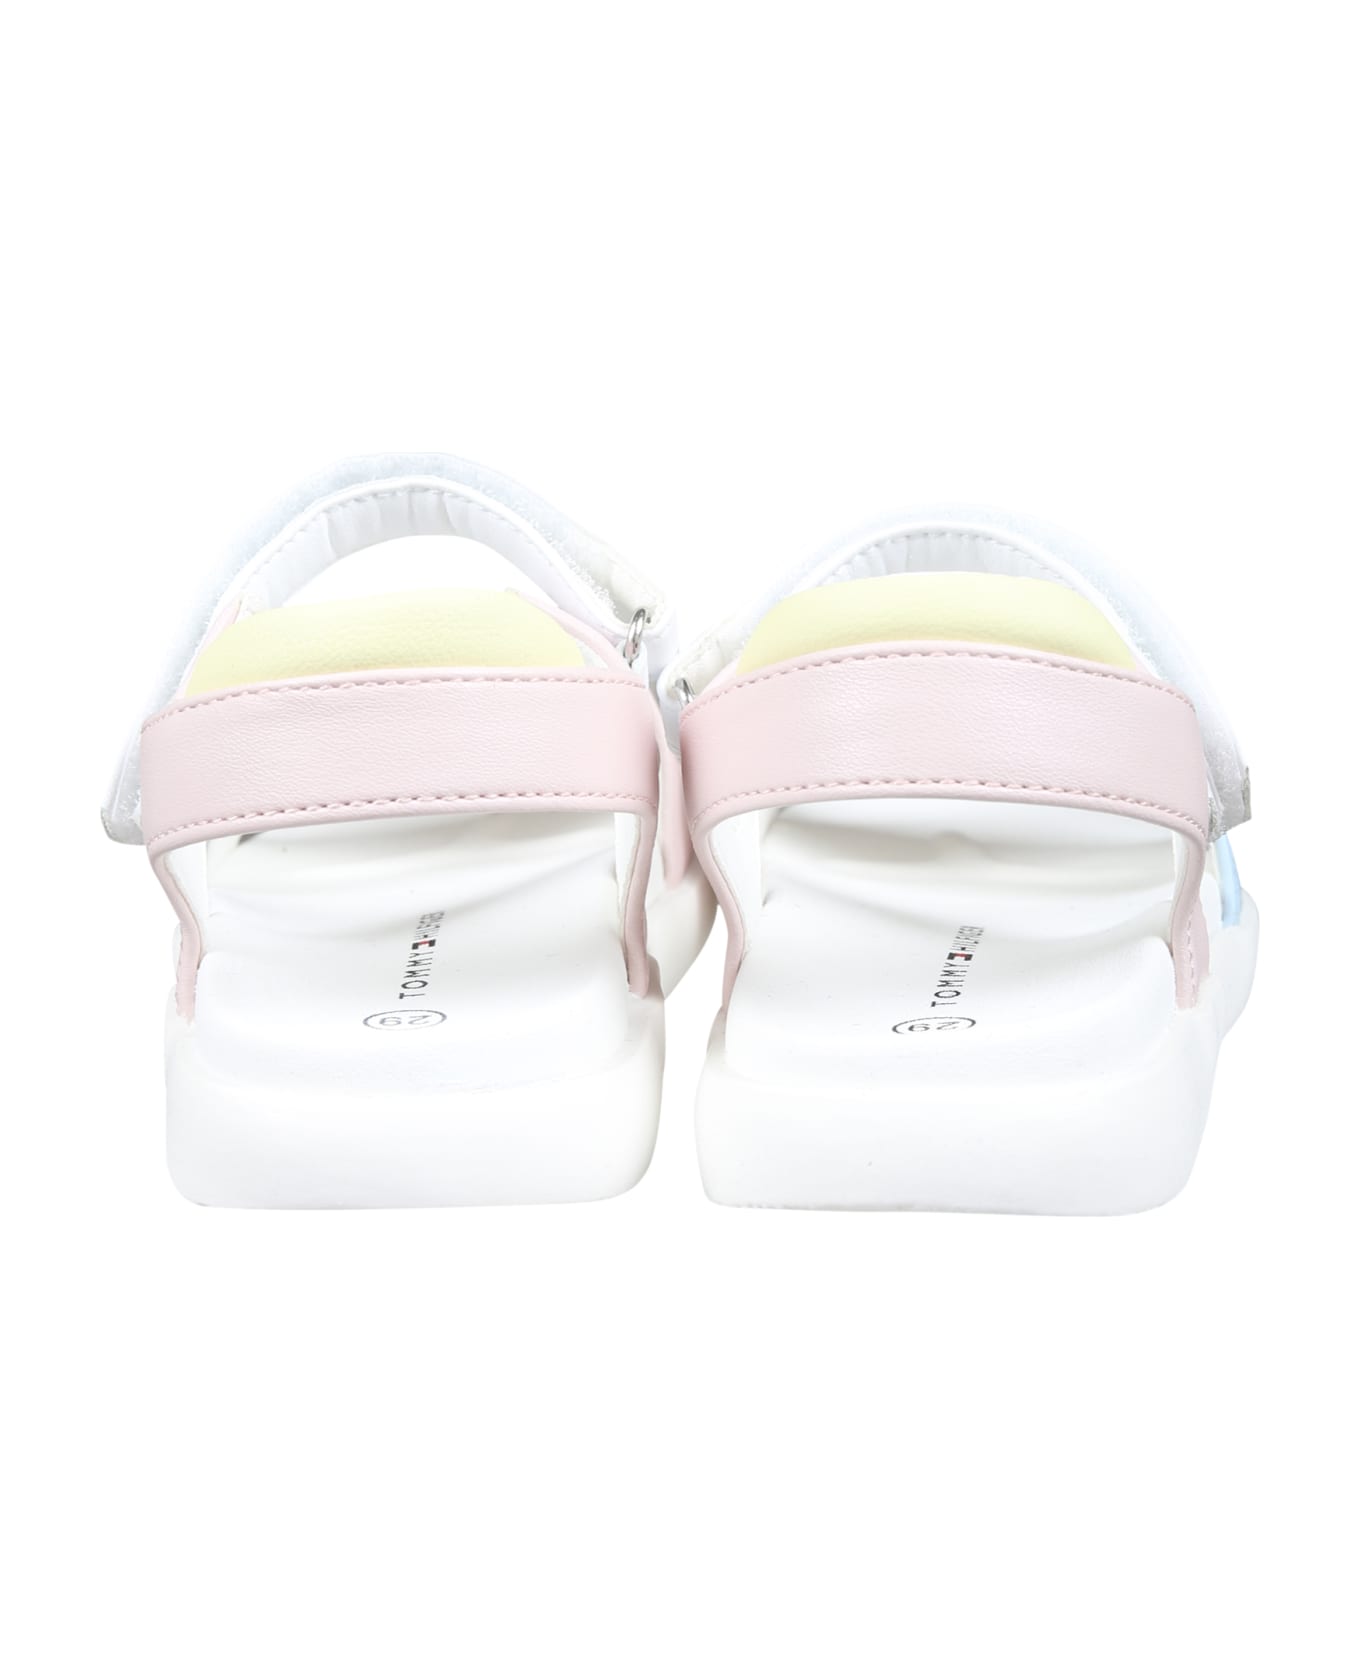 Tommy Hilfiger White Sandals For Girl With Logo And Heart - Pink シューズ